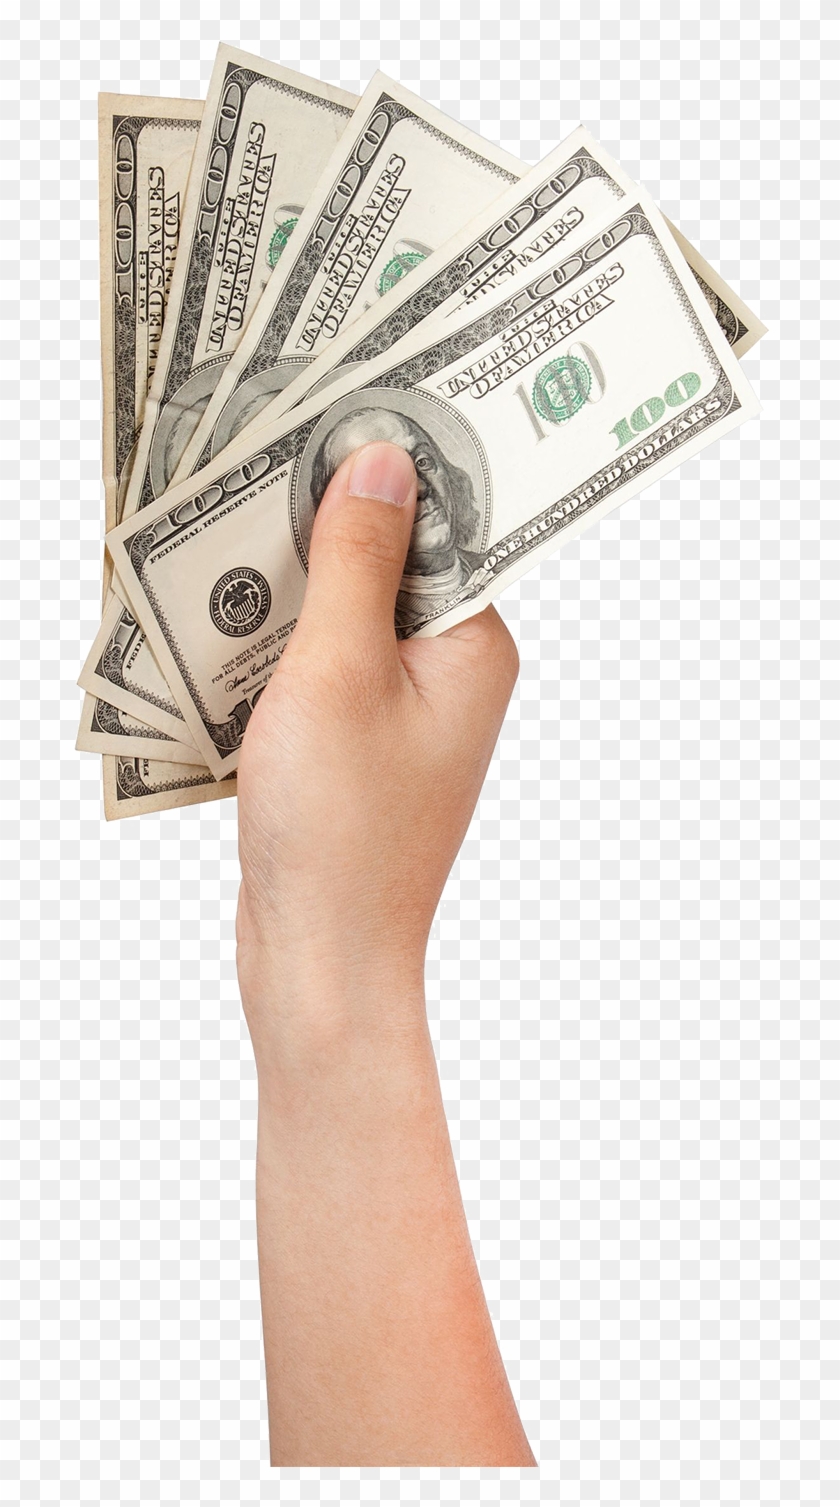 Cash In Hand Png Transparent Background, Png Download - 700x1427